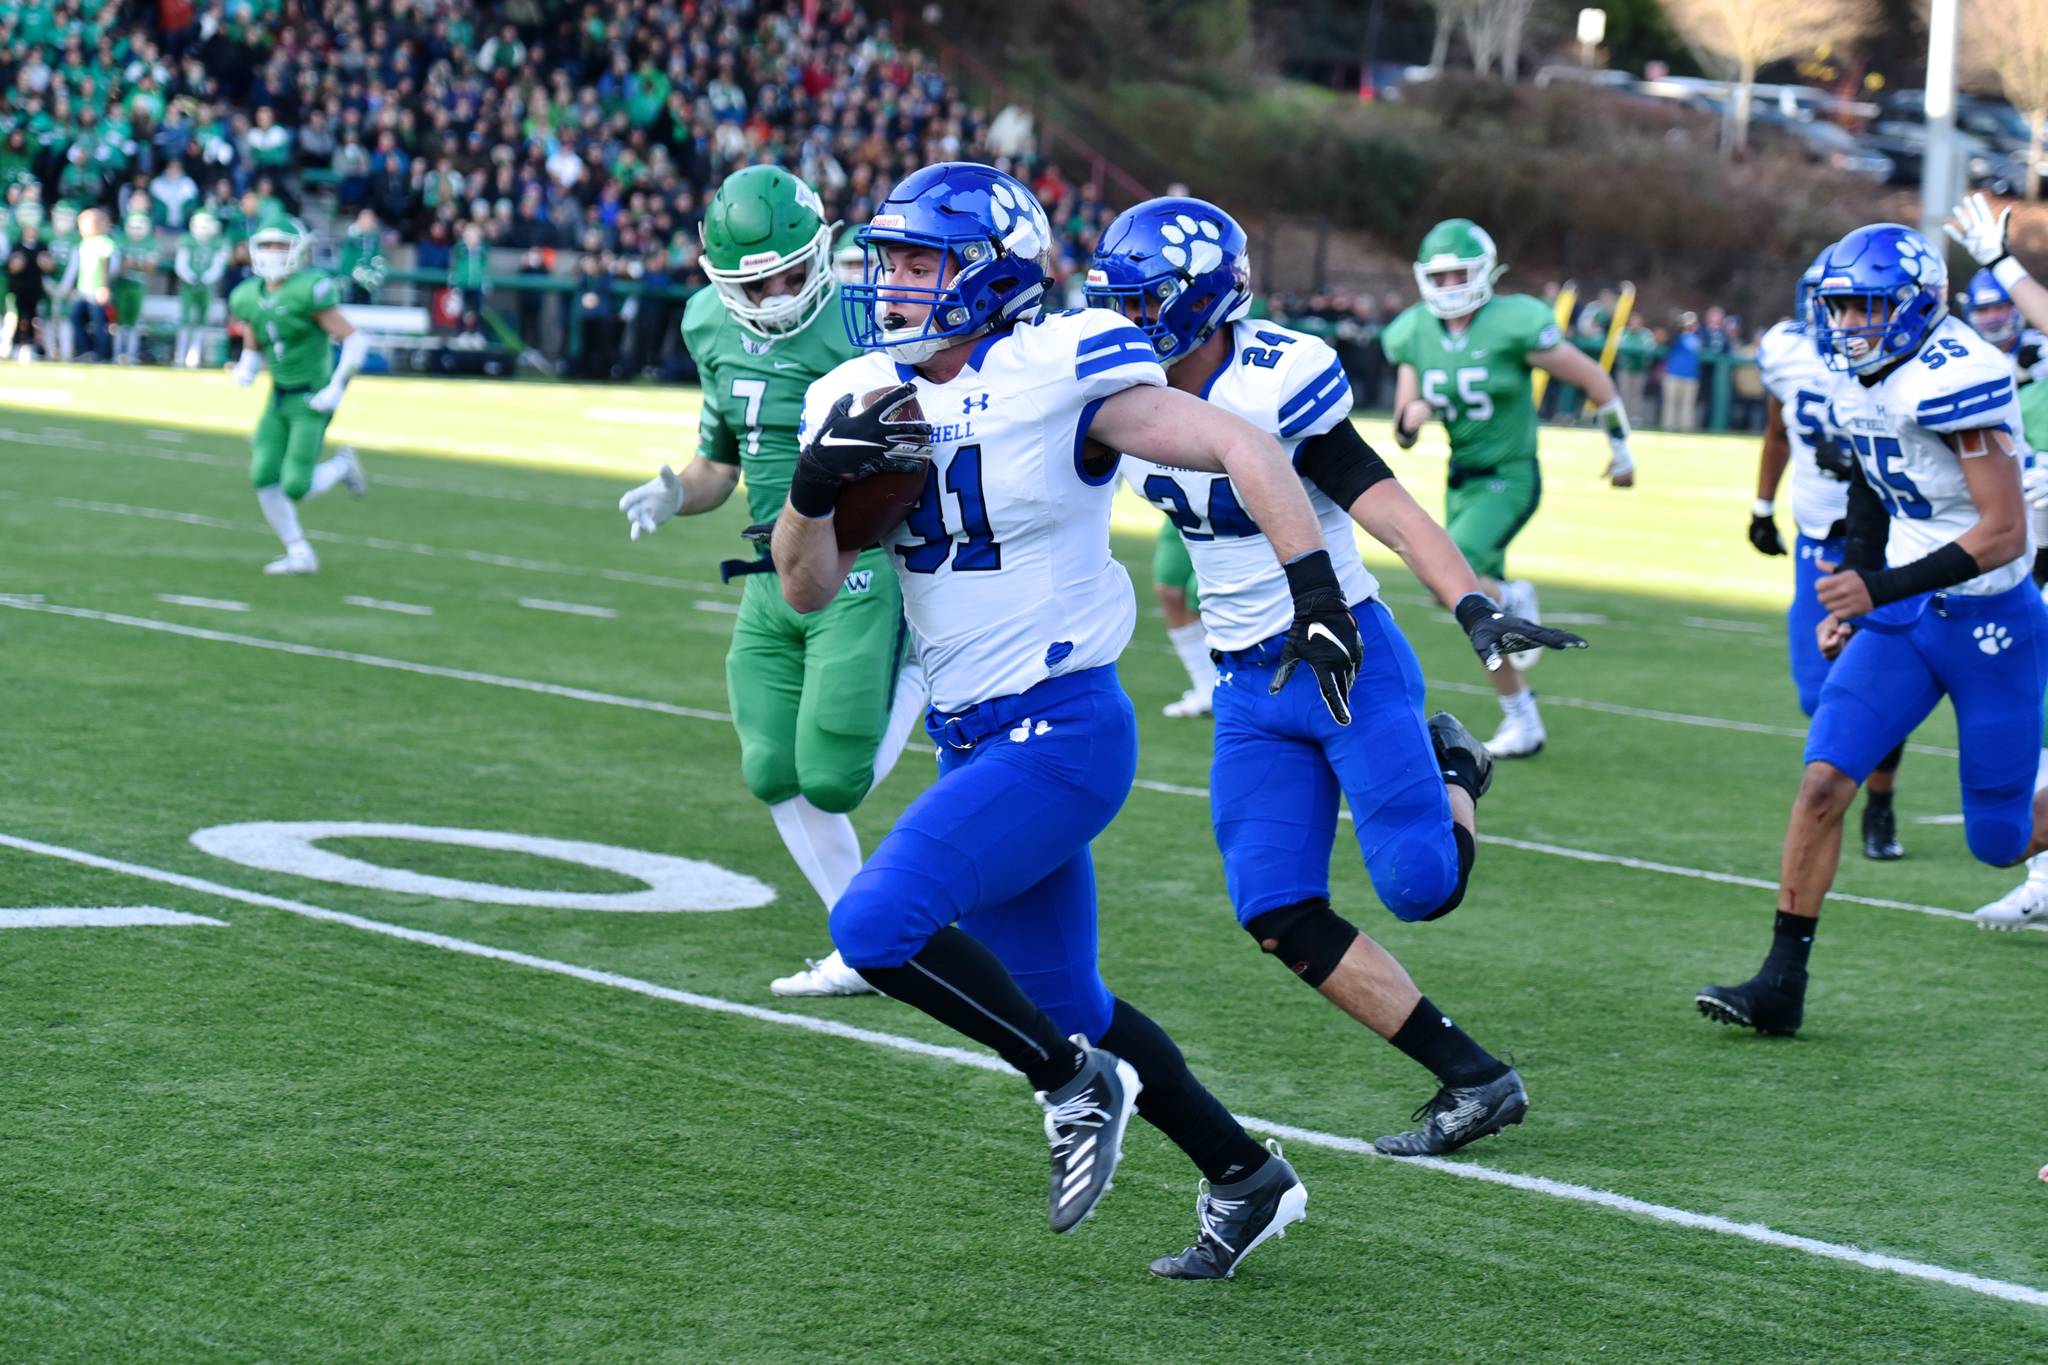 Bothell’s Ryan Metz returns a fumble for a touchdown in the 4A state semifinal against Woodinville. Photo courtesy of Greg Nelson